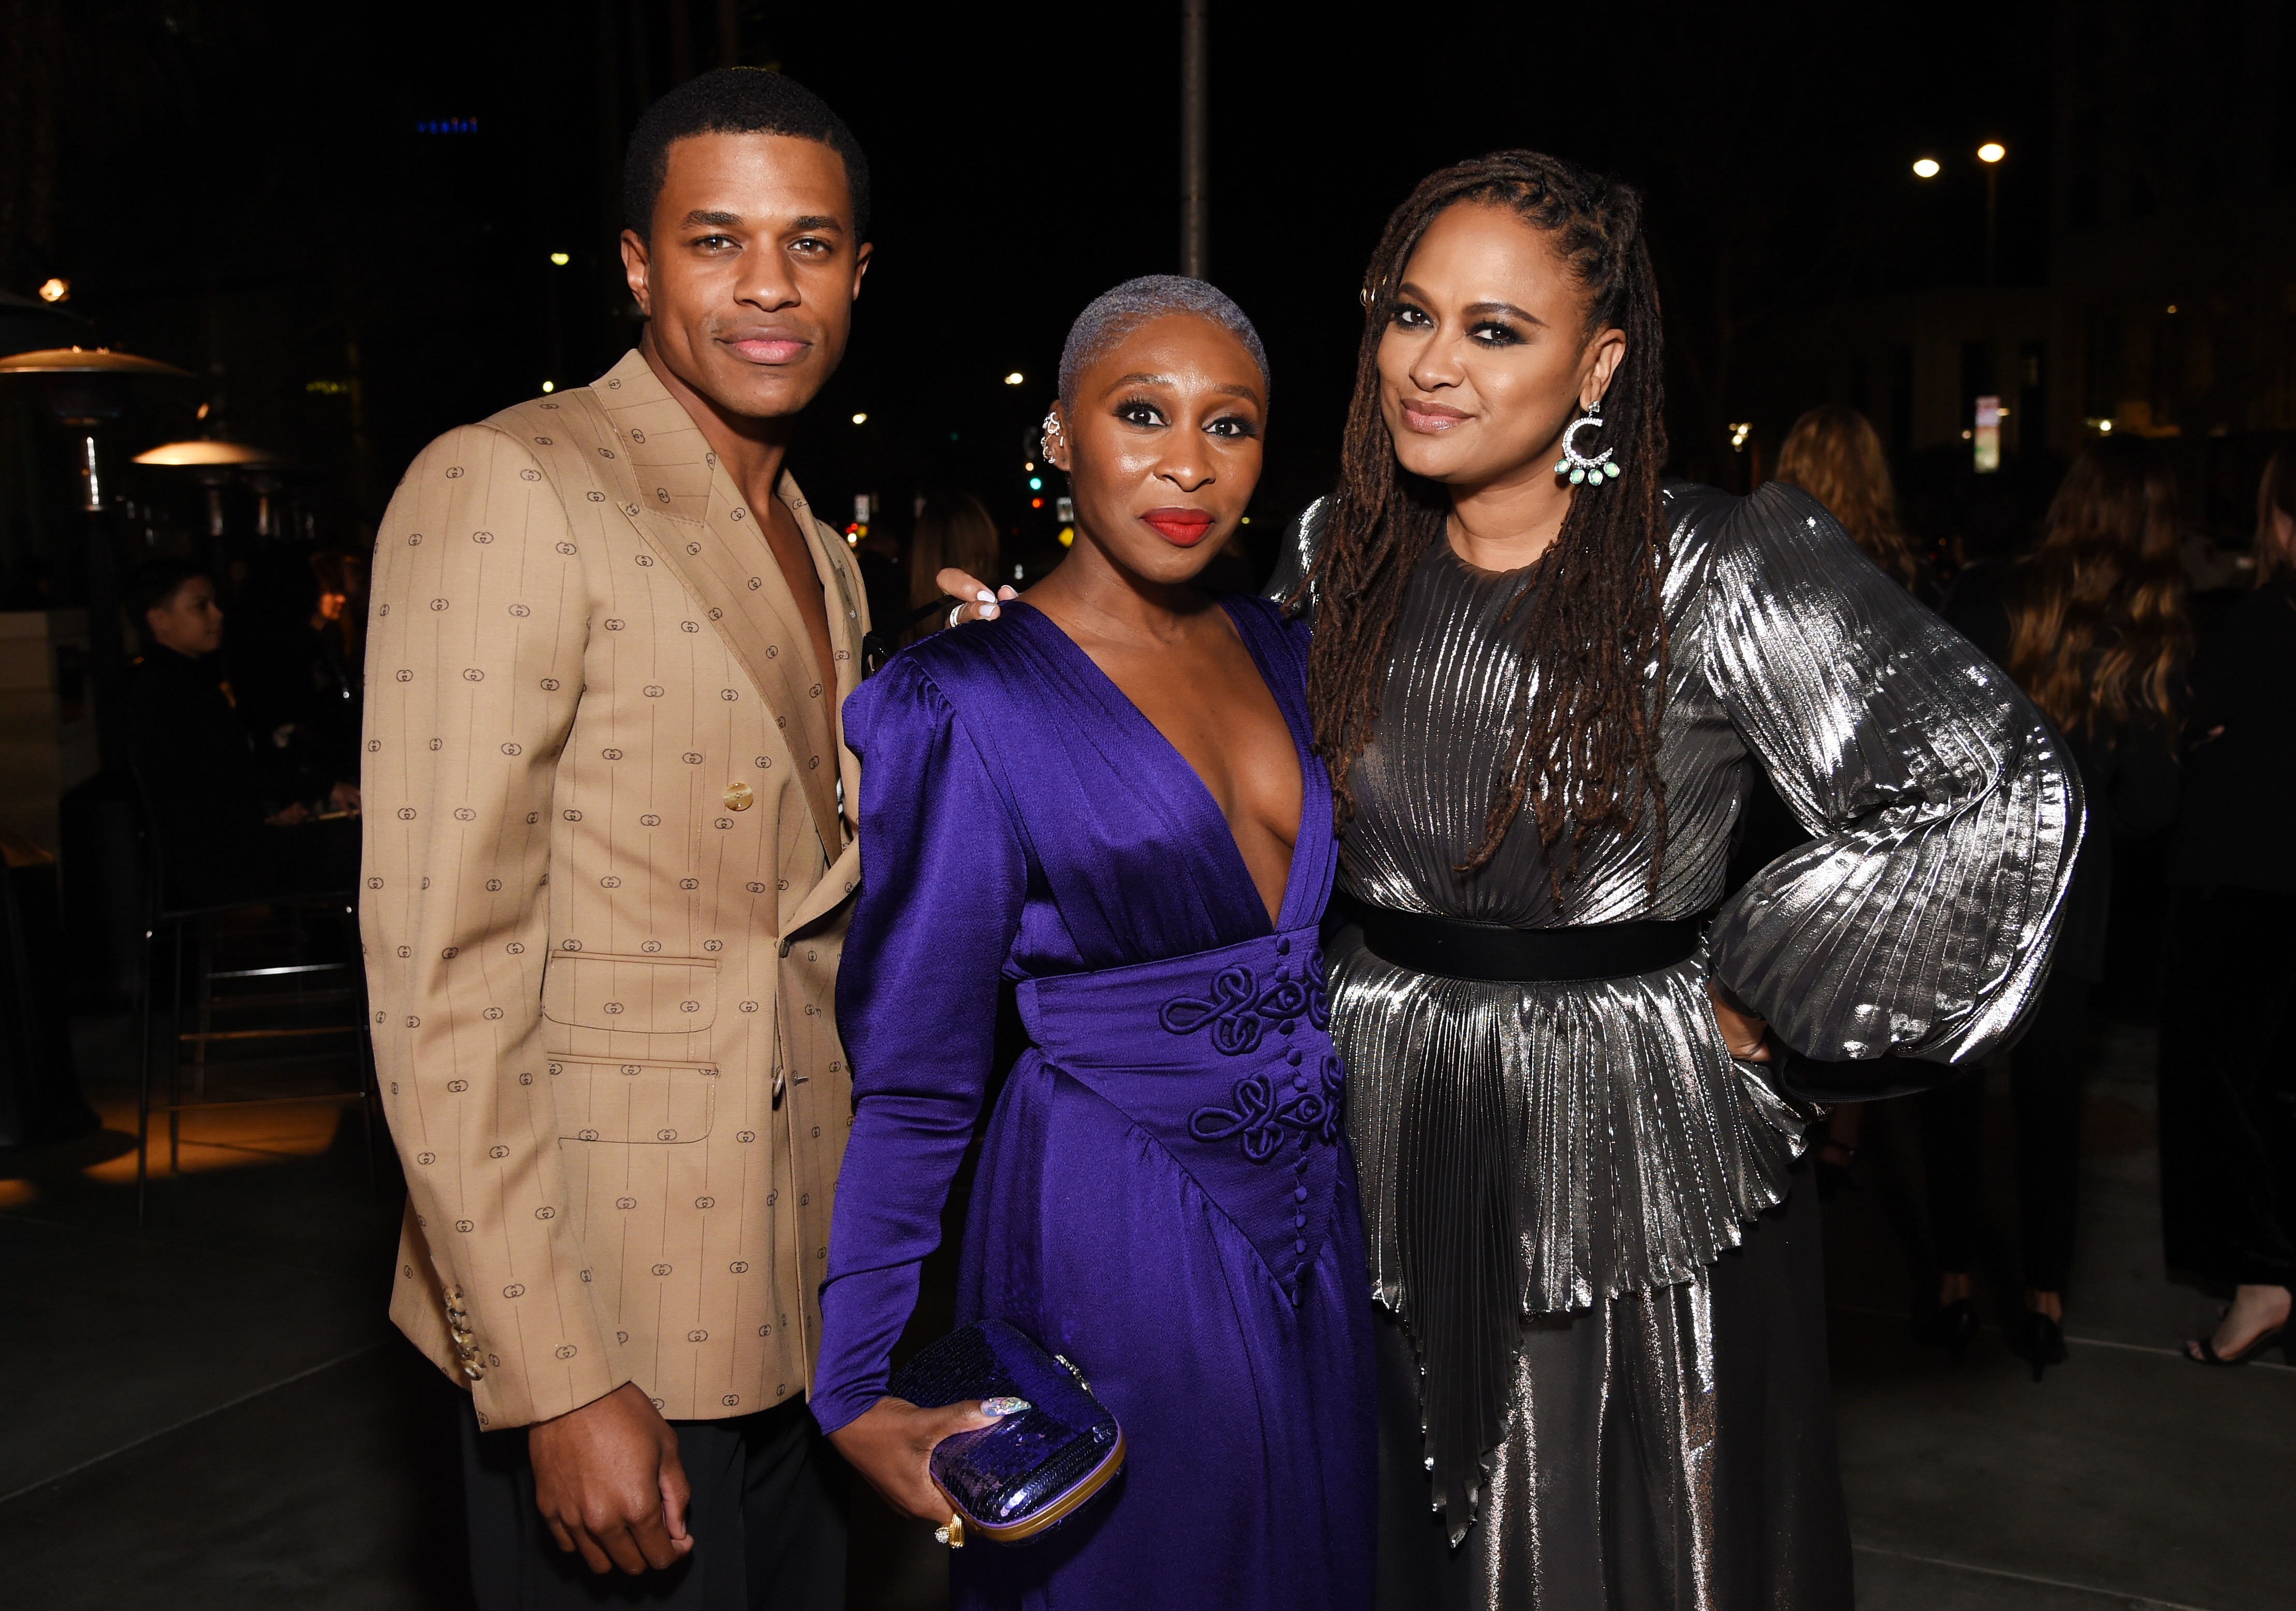 Jeremy Pope, Cynthia Erivo, and Ava DuVernay, photo by Michael Kovac/Getty Images for LACMA